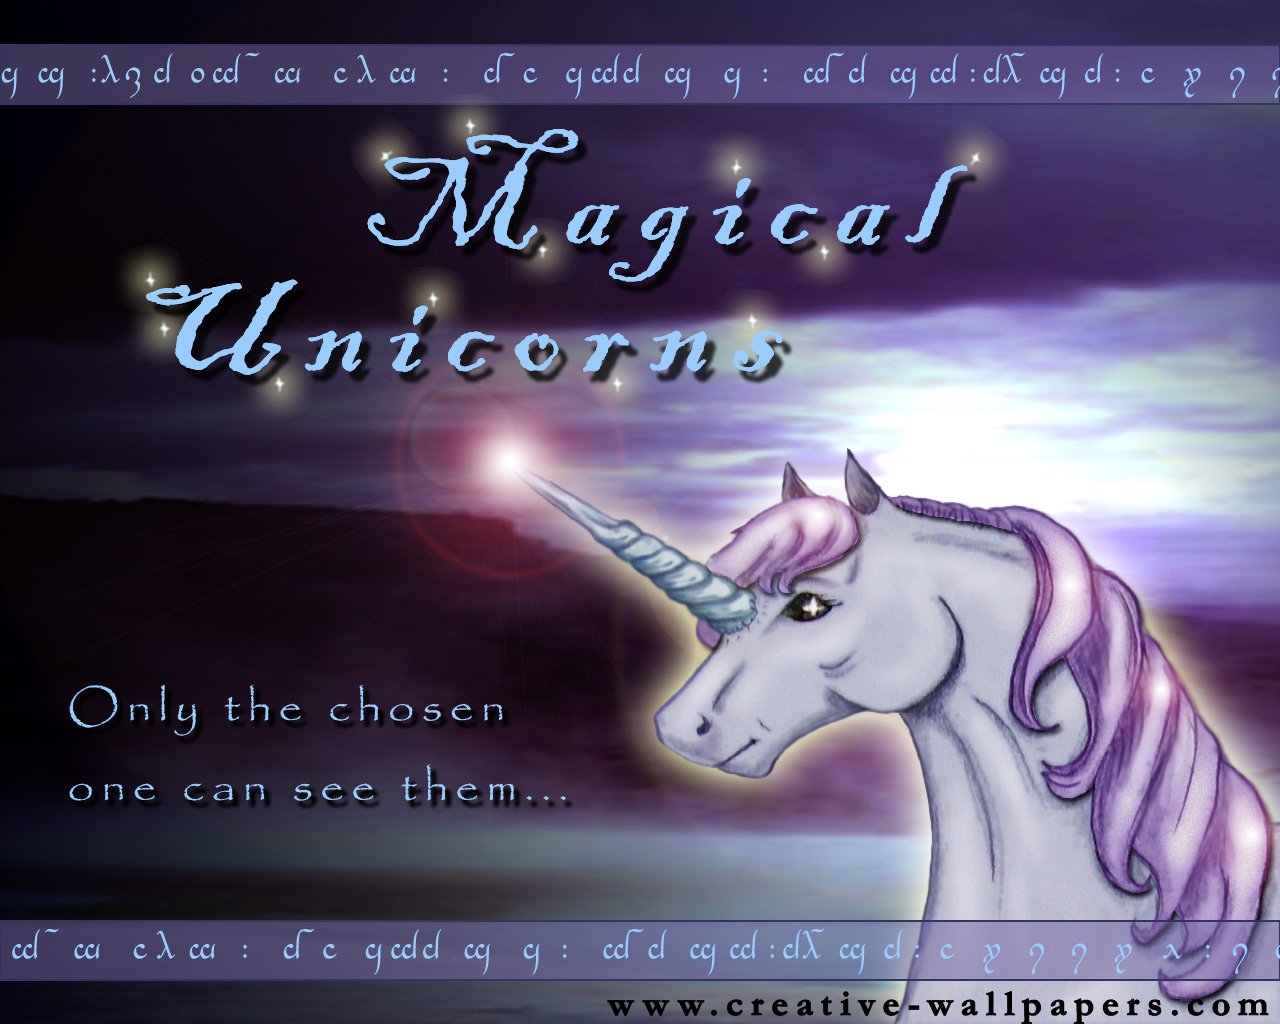  Unicorn   Free Desktop Backgrounds from us at Creative Wallpapers